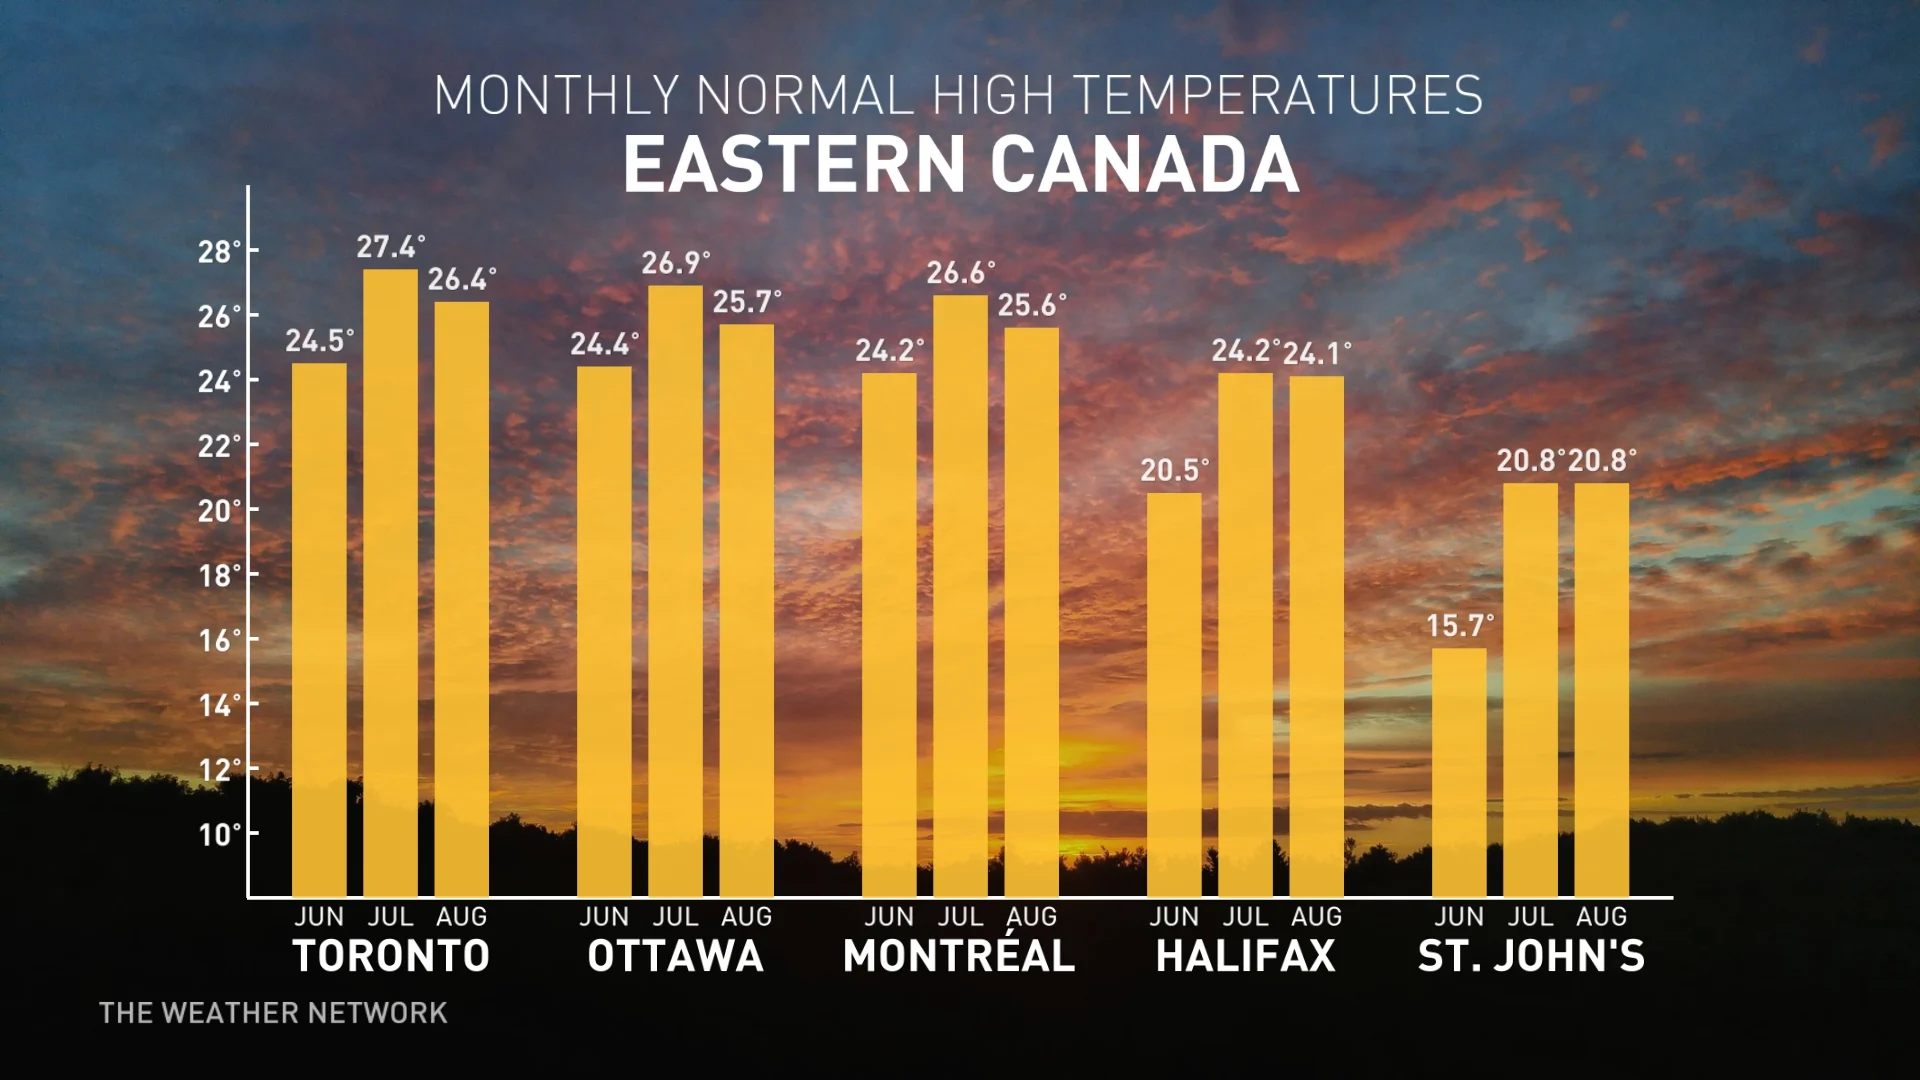 Monthly temperature averages for major cities across Eastern Canada